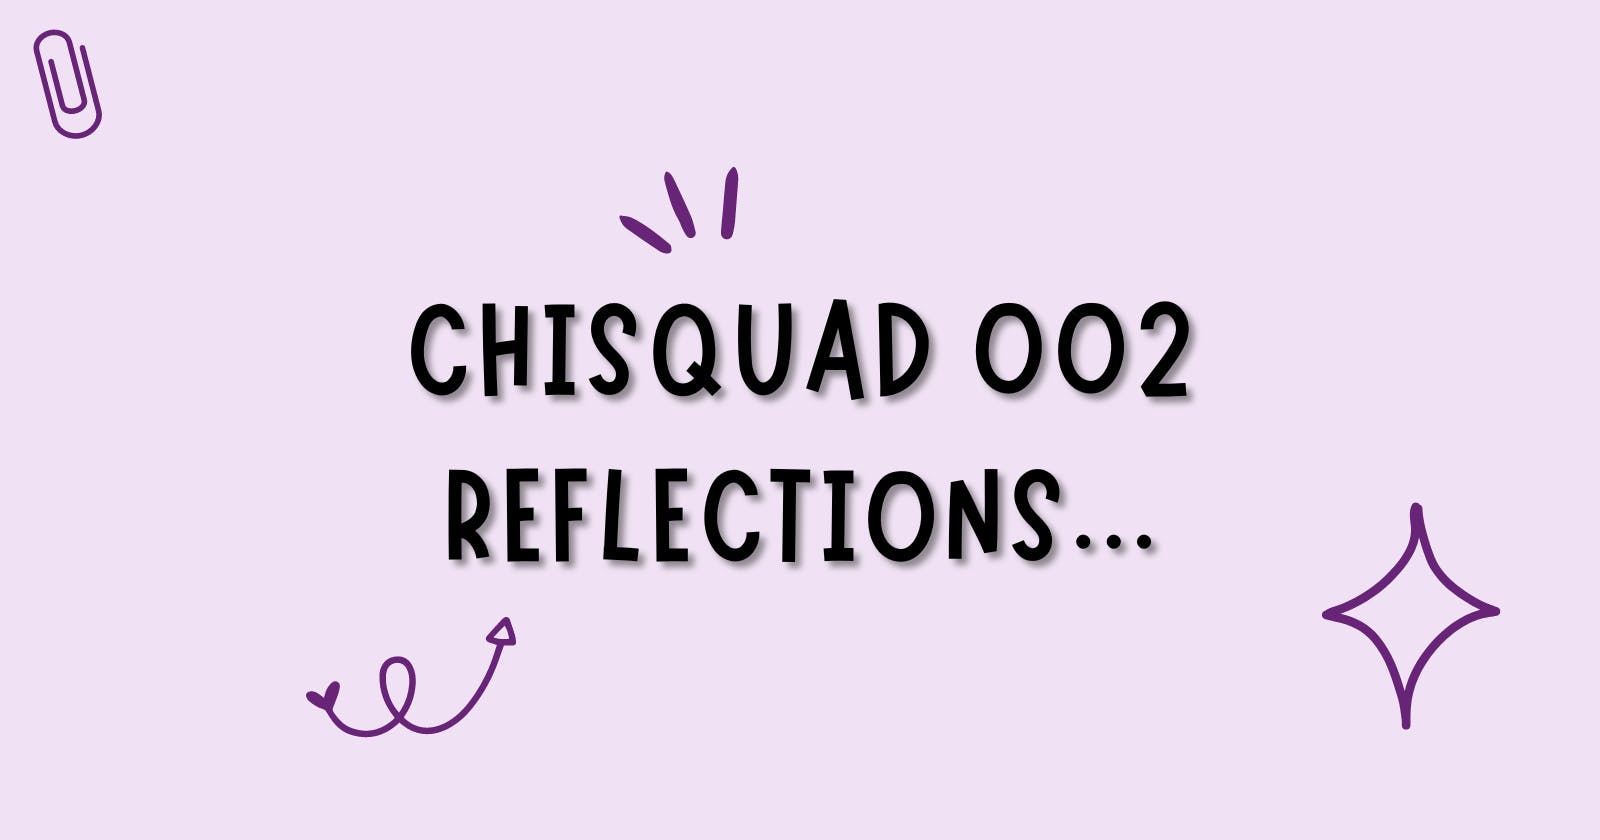 ChiSquad 002 Reflections: Celebrating Collaborative Successes in Our Ambassador Community